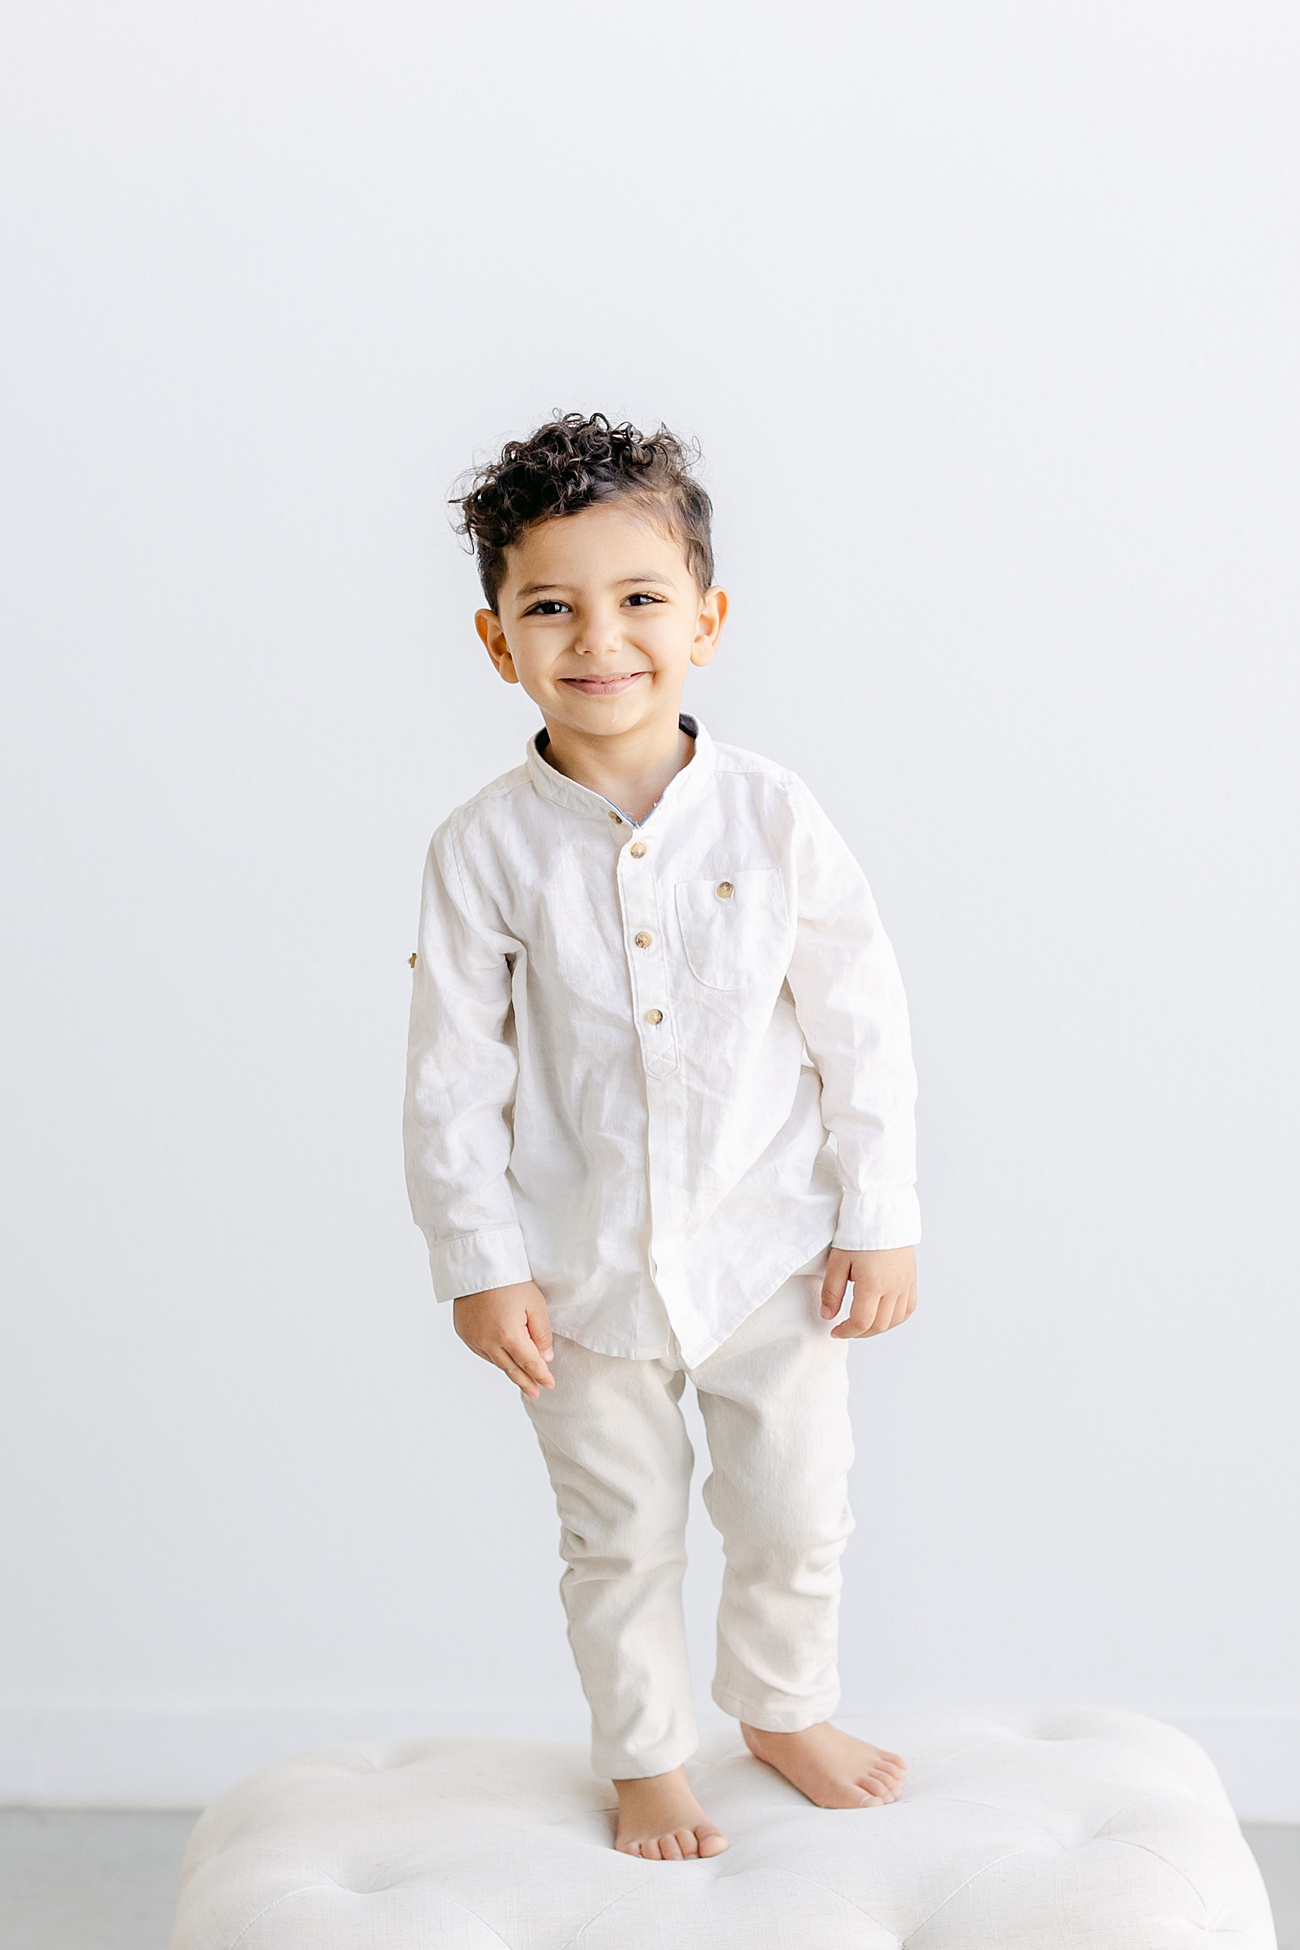 Adorable smiling boy in studio portrait by Sana Ahmed Photography.